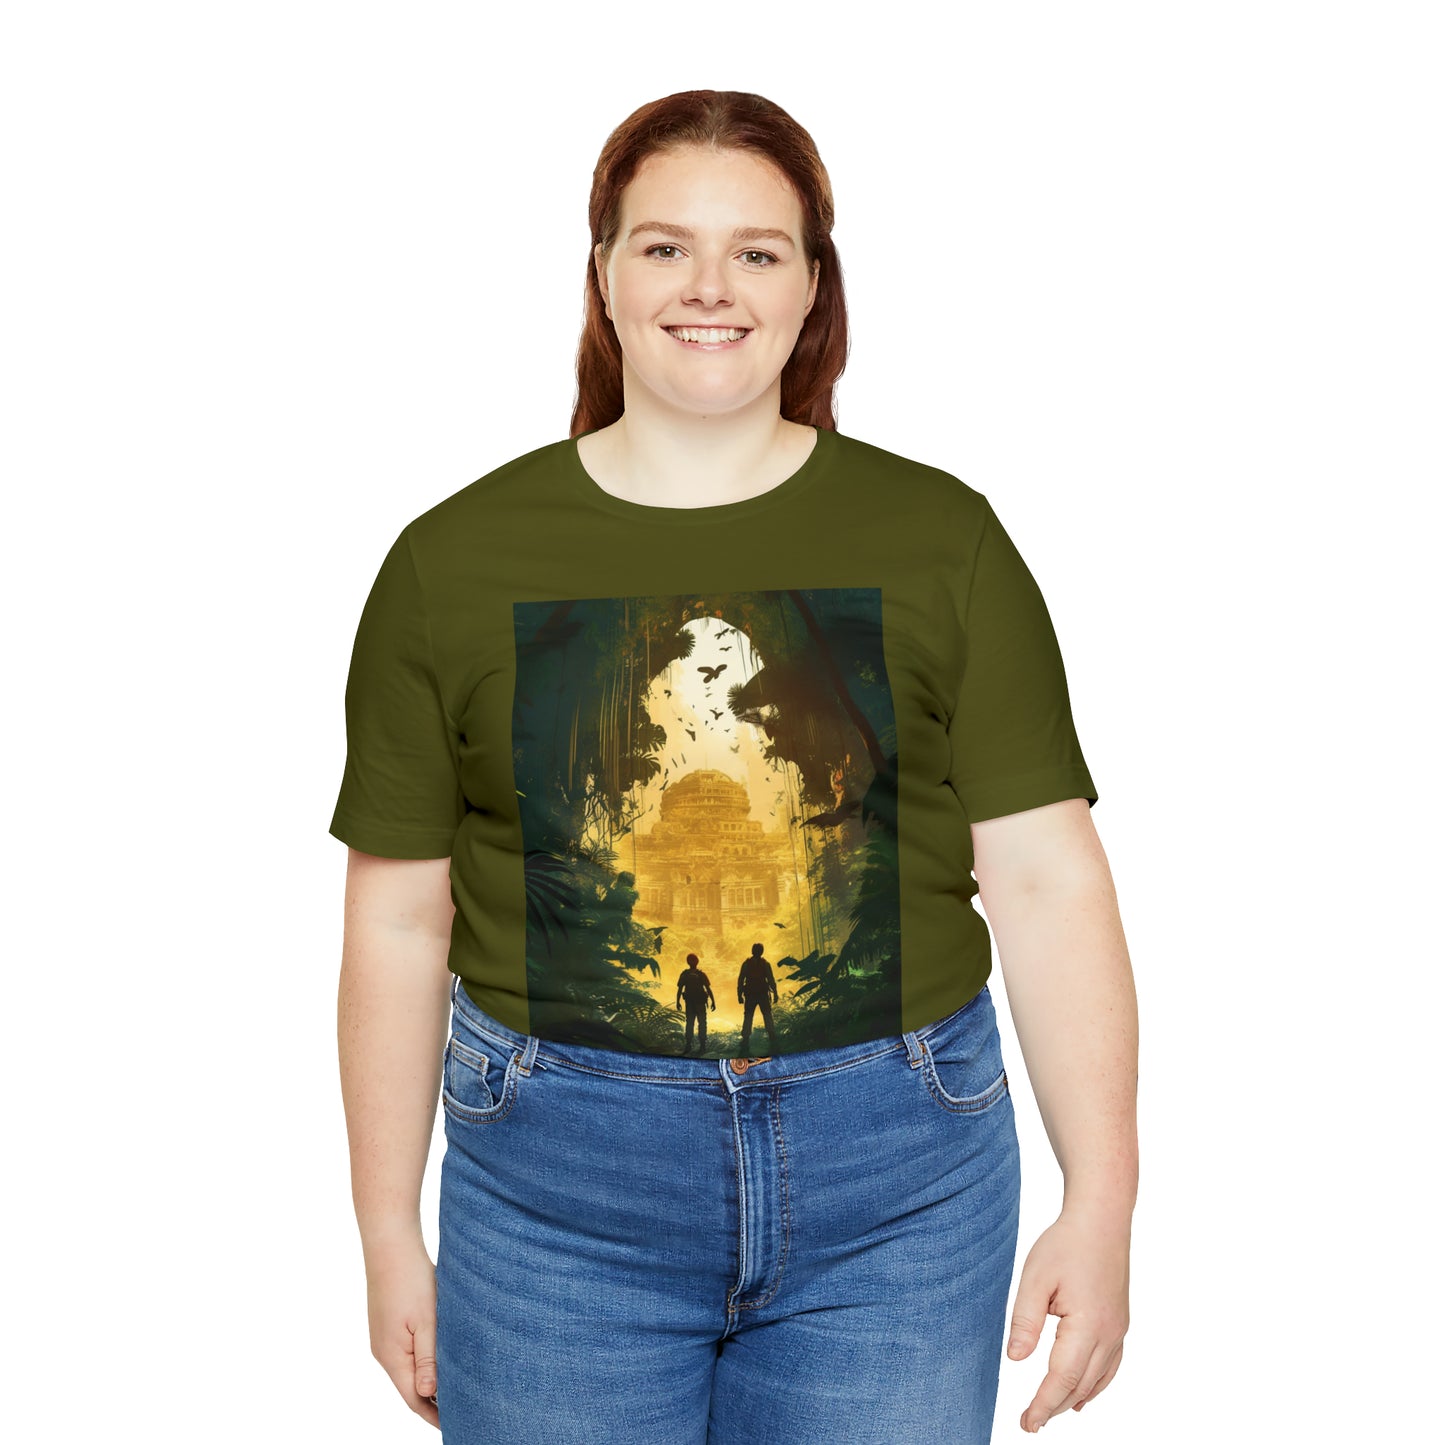 olive-quest-thread-tee-shirt-with-ruins-of-arnak-scene-on-front